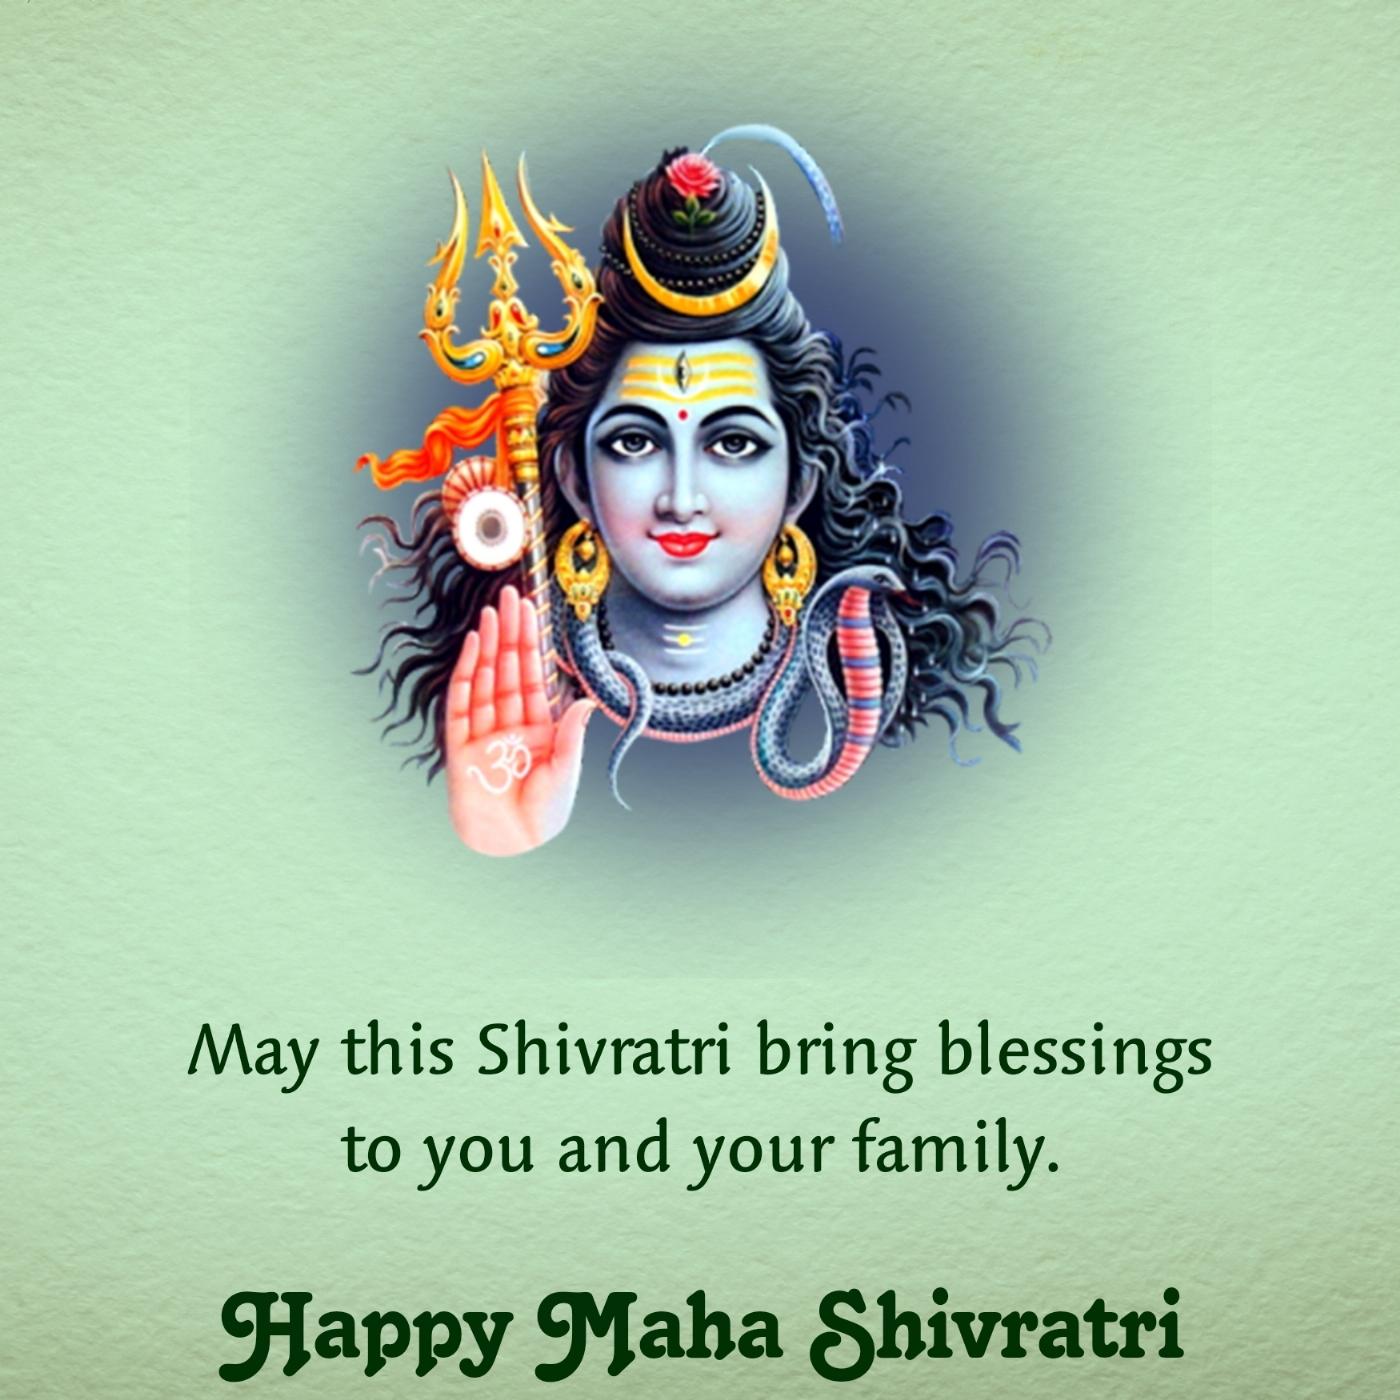 May this Shivratri bring blessings to you and your family